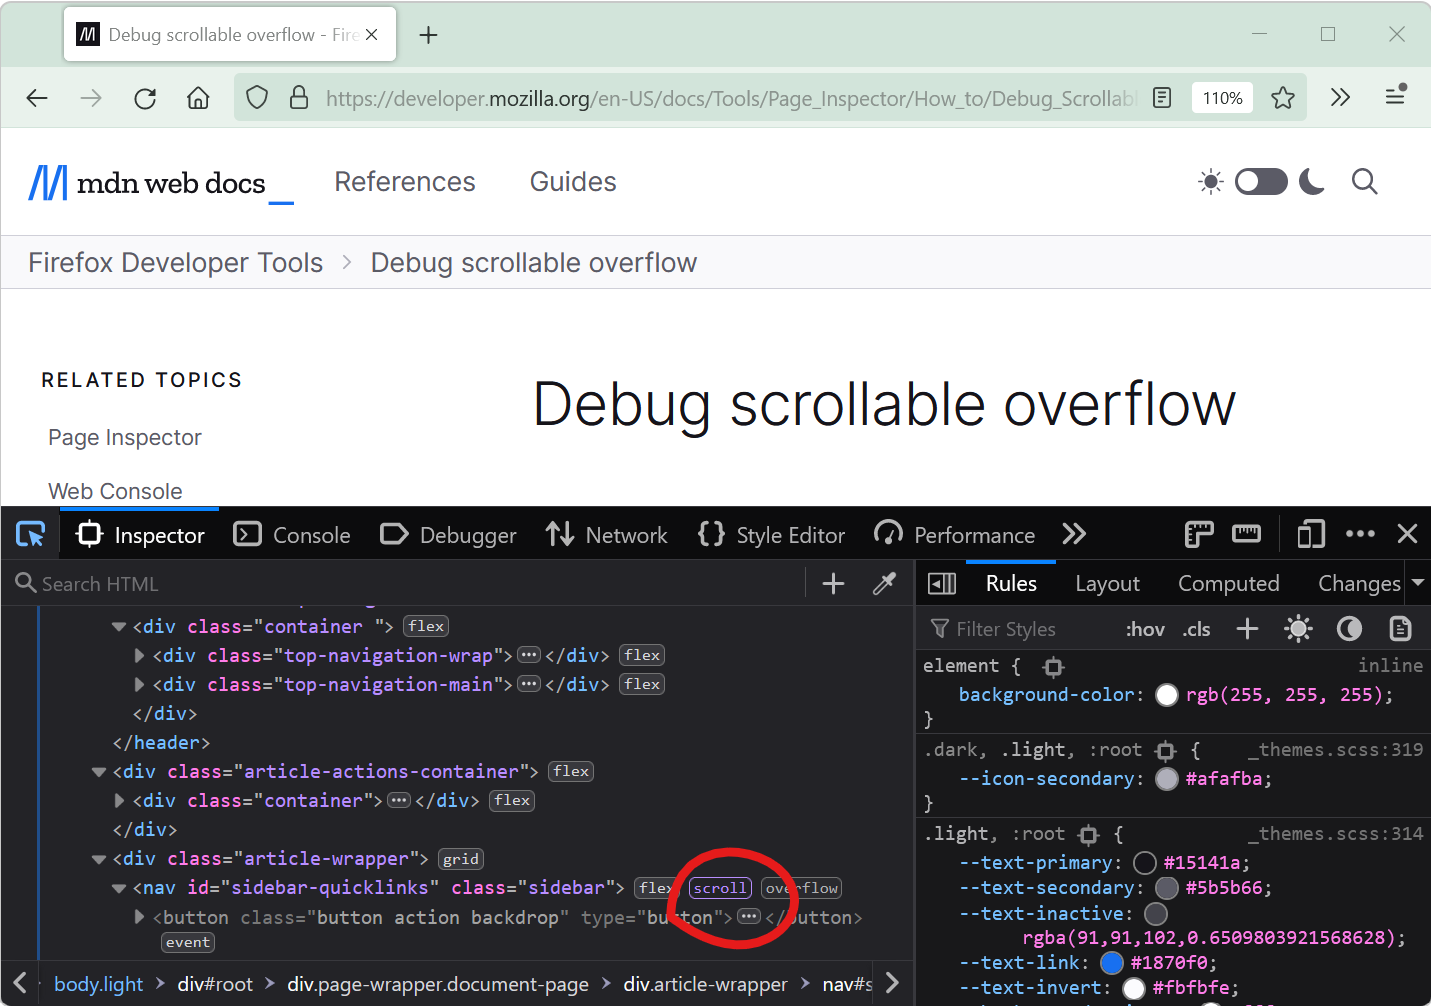 Firefox DevTools, with the Inspector panel showing the Scroll badge on an element.